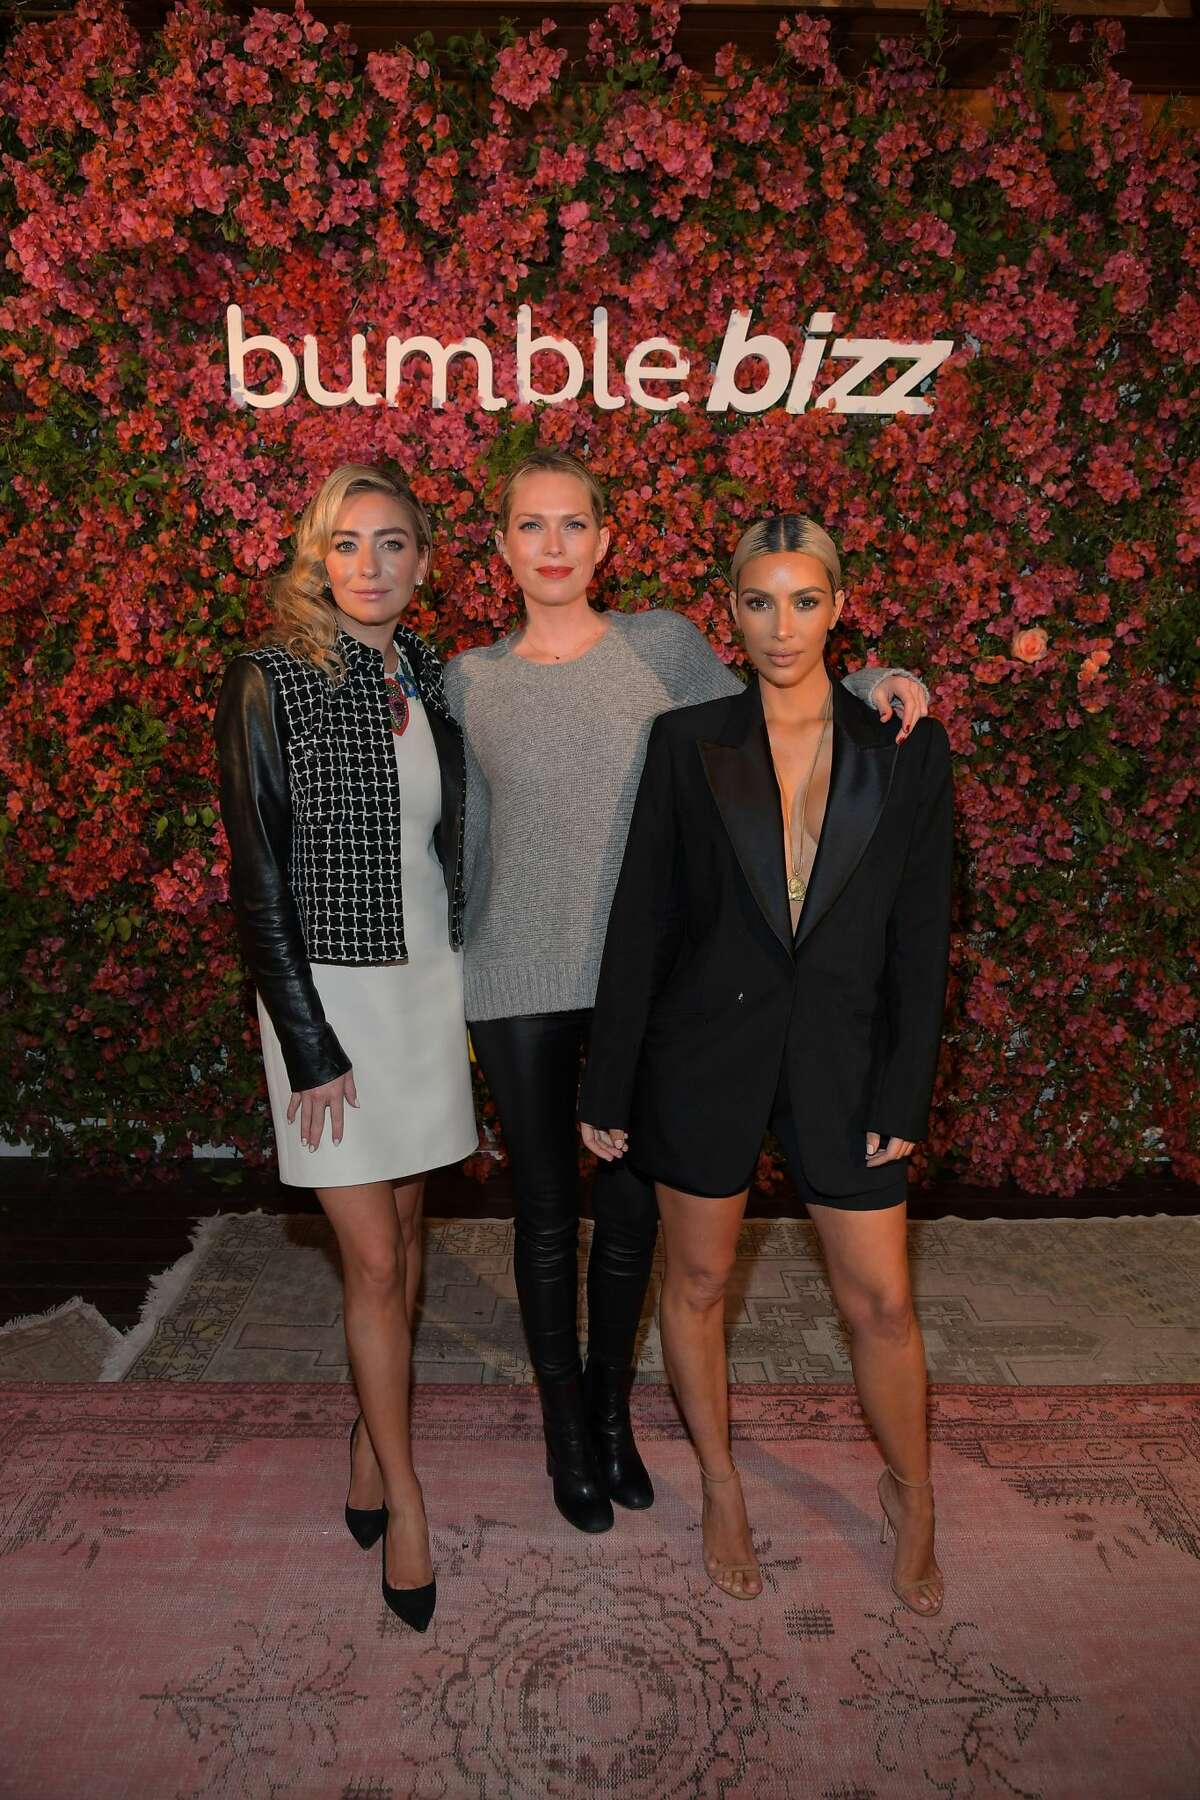 Whitney Wolfe Herd, Erin Foster, and Kim Kardashian attend Bumble Bizz Los Angeles Launch Dinner At Nobu Malibu at Nobu Malibu. Herd is known for living a lavish lifestyle and is regularly photographed with celebrities.